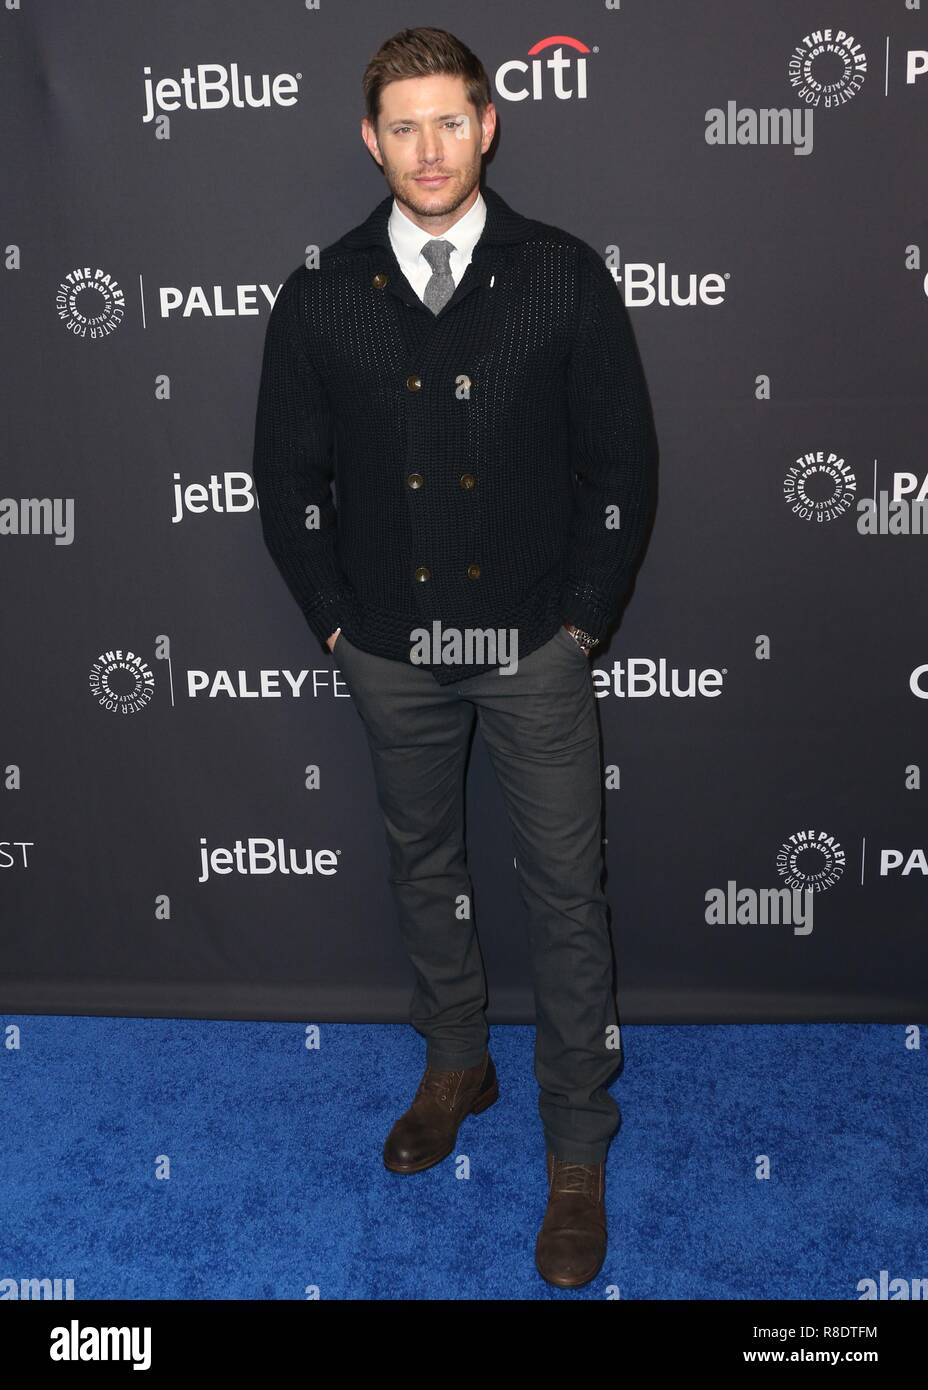 HOLLYWOOD, LOS ANGELES, CA, USA - MARCH 20: Jensen Ackles at the 2018 PaleyFest Los Angeles - CW's 'Supernatural' held at the Dolby Theatre on March 20, 2018 in Hollywood, Los Angeles, California, United States. (Photo by David Acosta/Image Press Agency) Stock Photo